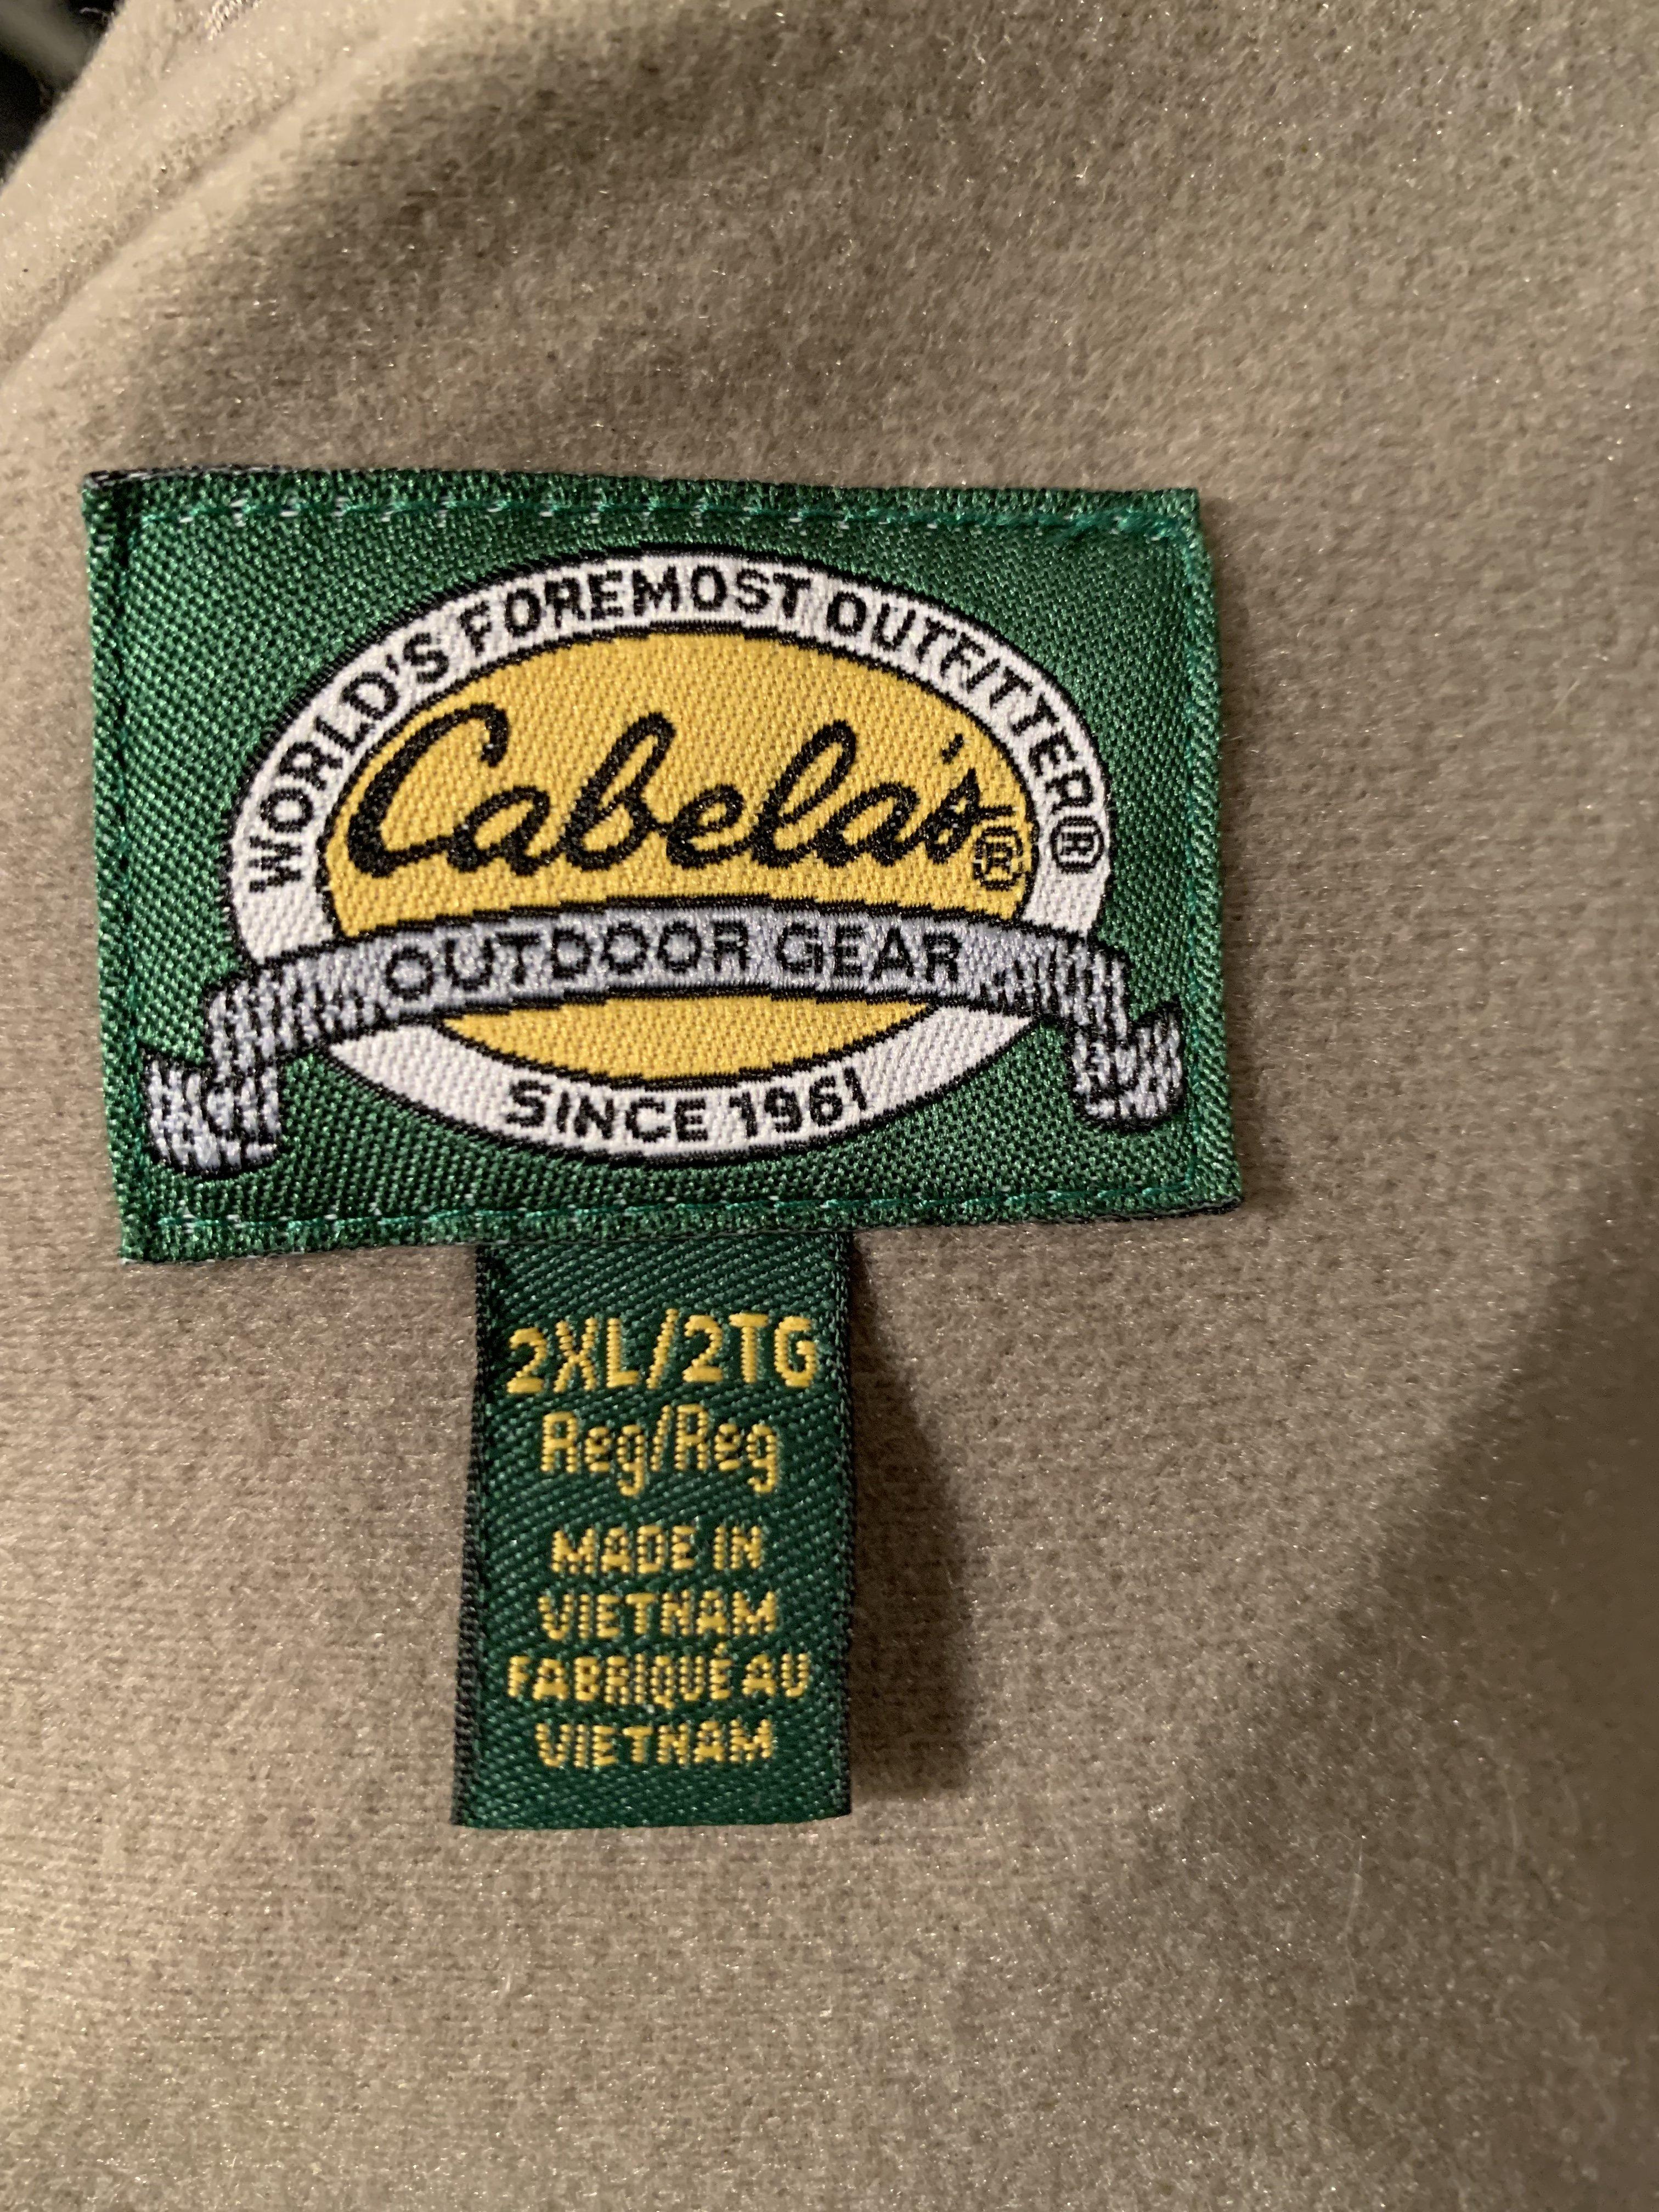 Cabela’s snow camo wooltimate | Long Range Hunting Forum